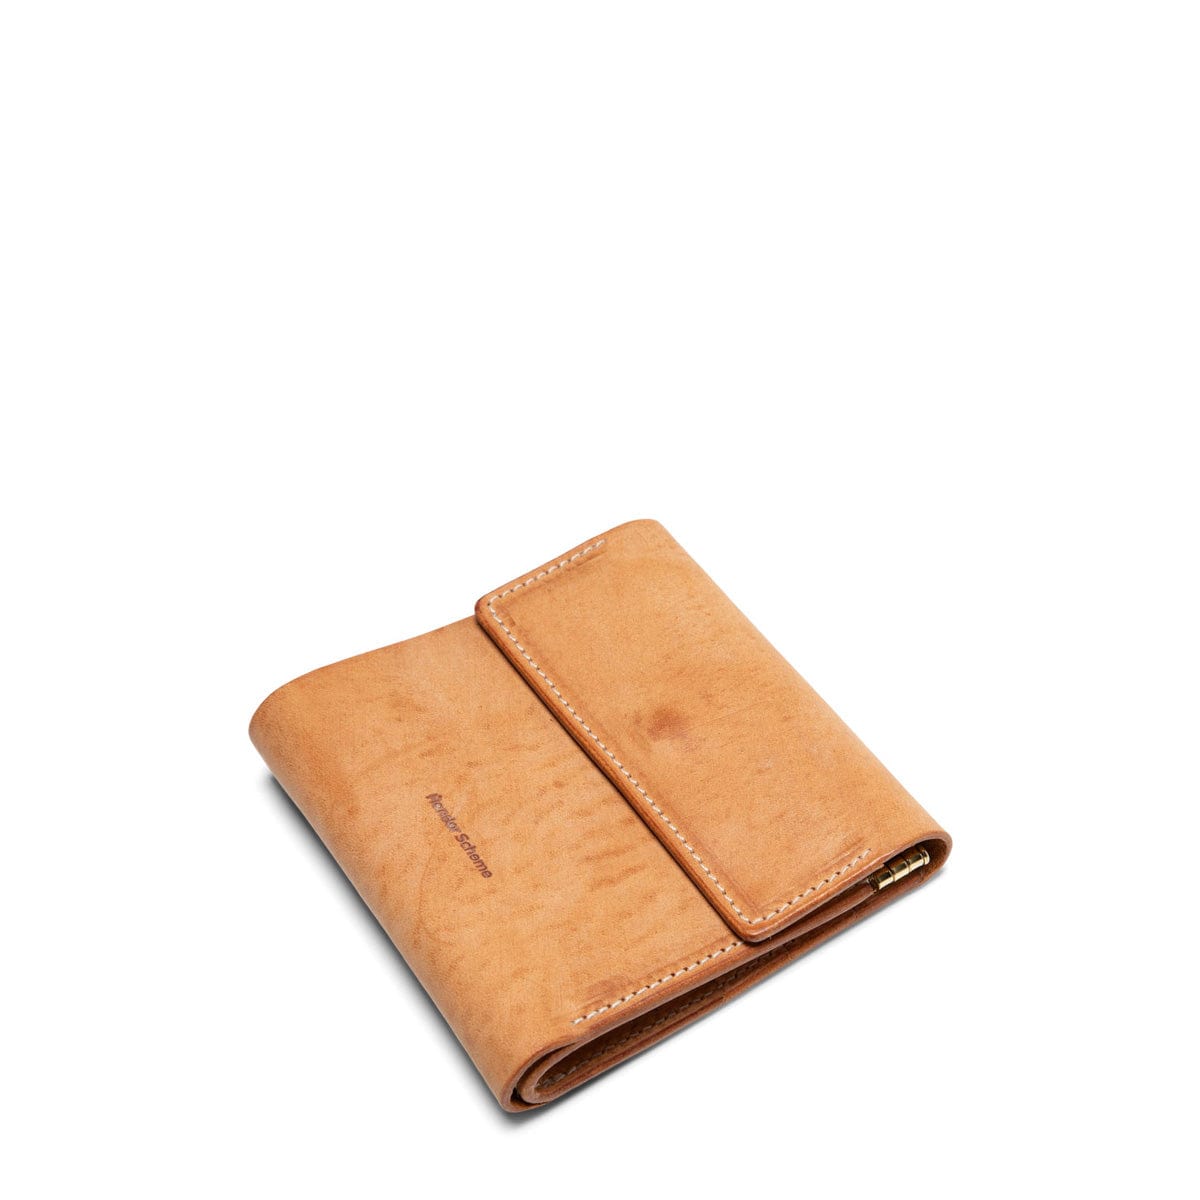 Hender Scheme Wallets & Cases NATURAL / O/S CLASP WALLET